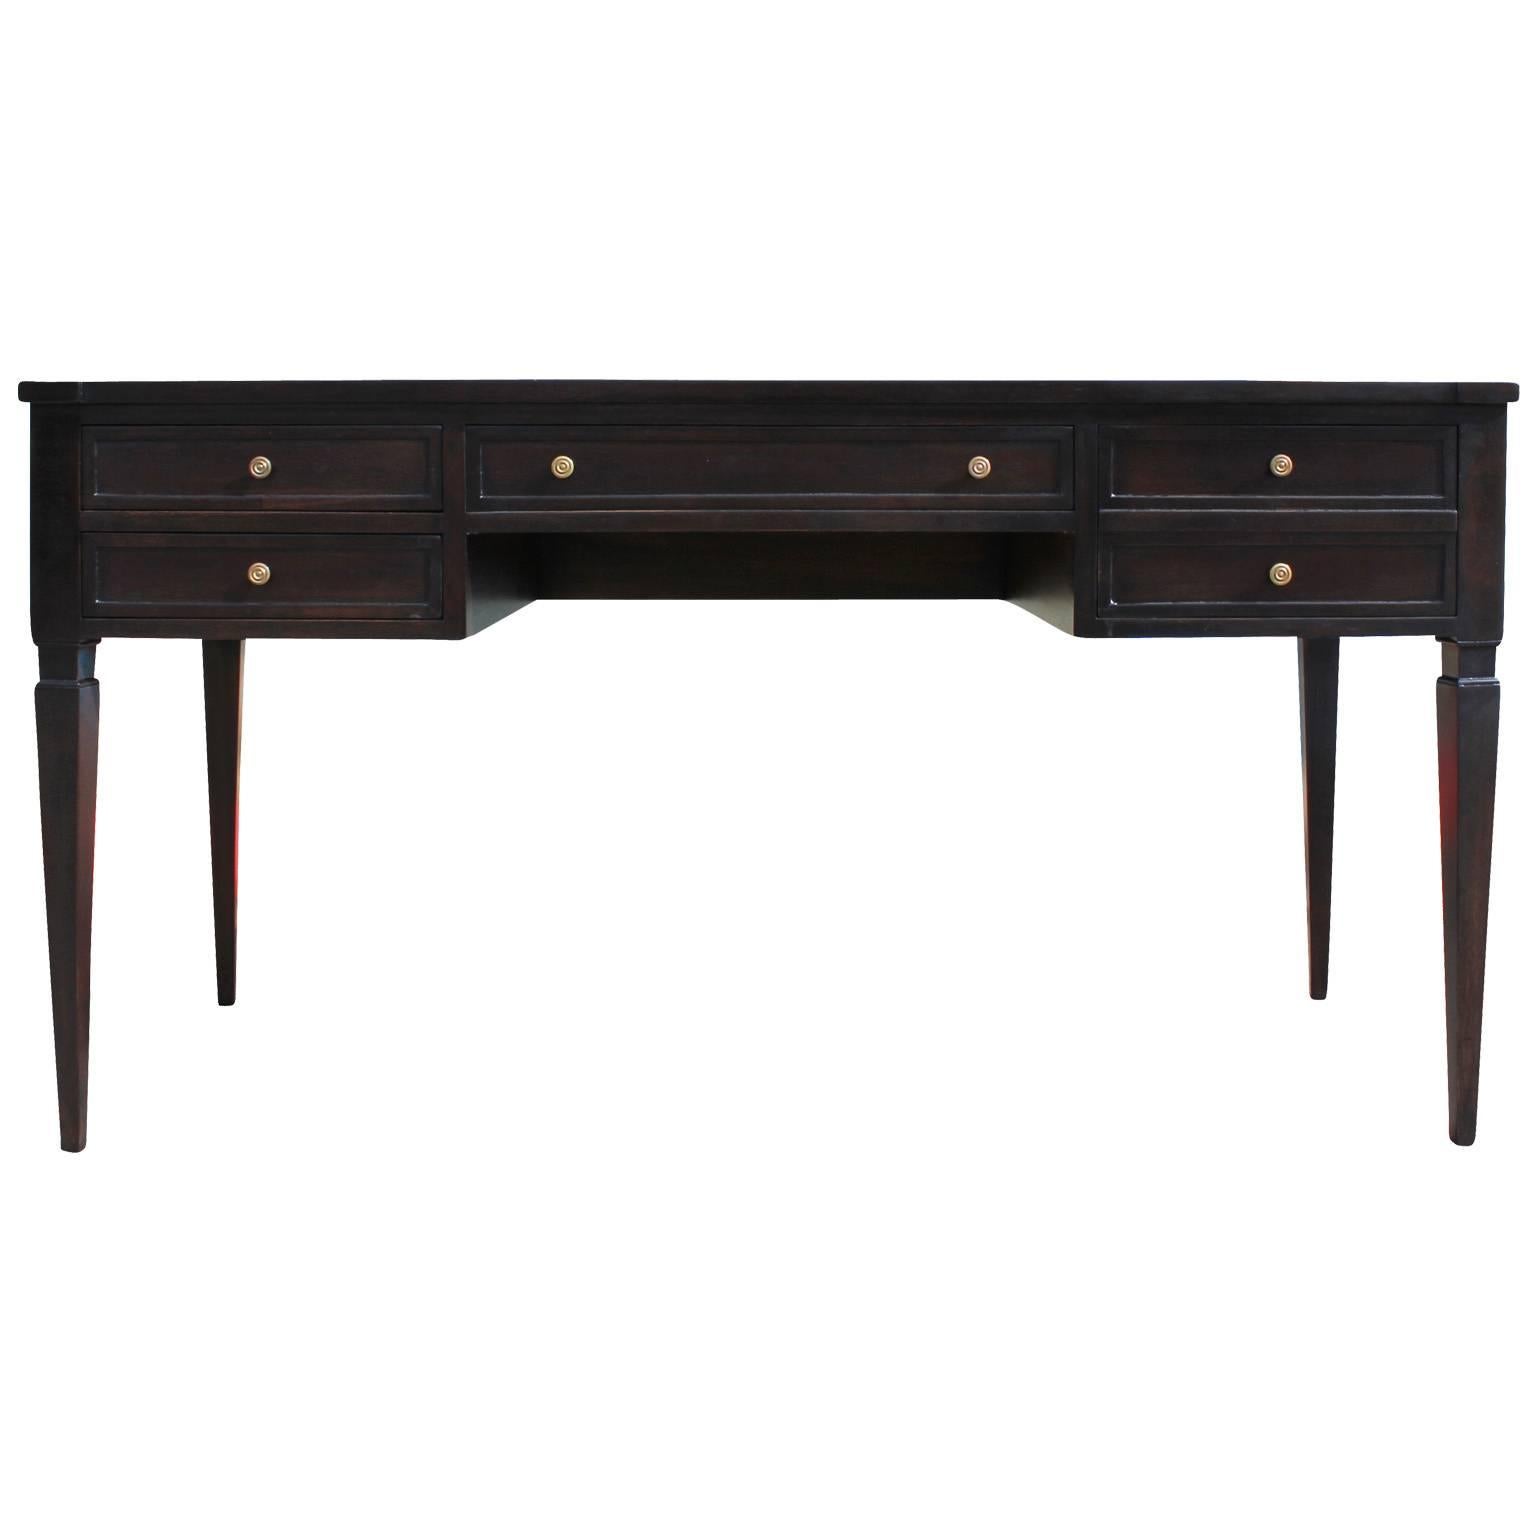 Elegant executive desk by Mount Airy. Desk has wonderful lines with a slightly bowed shape and an excellent attention to detail. Freshly finished in a deep ebony stain. Four drawers are accented with brass pulls.